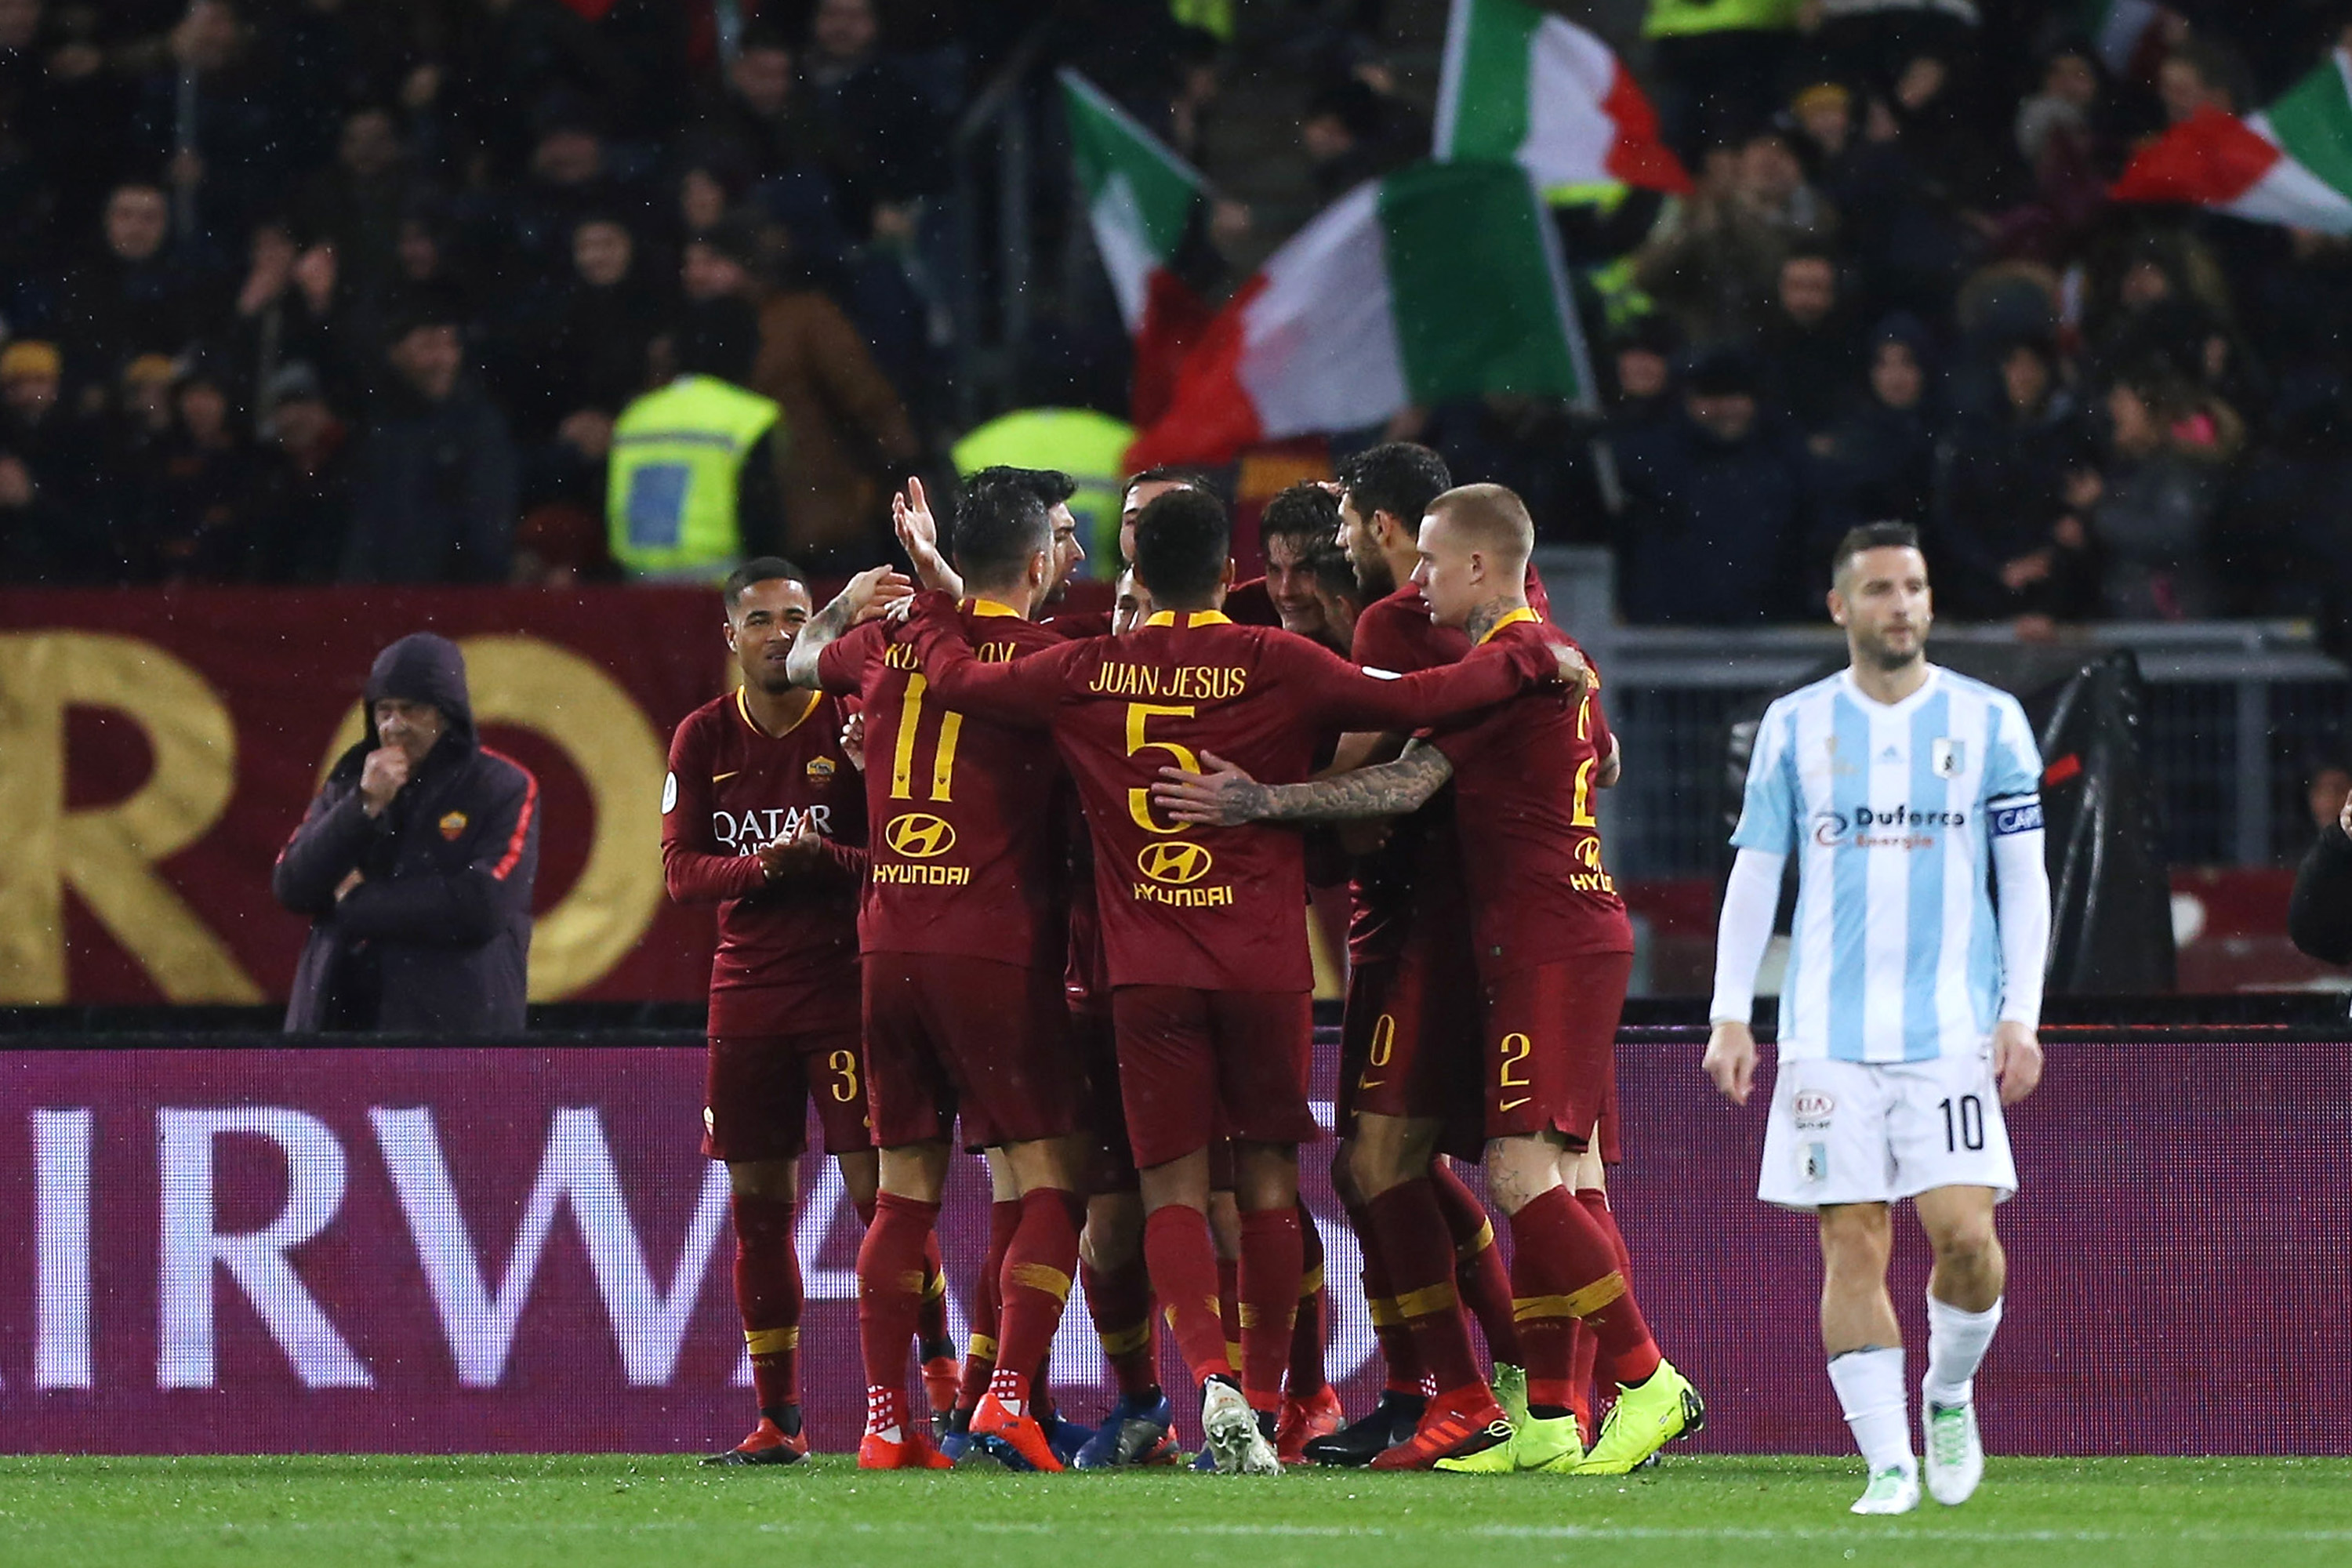 ROME, ITALY - JANUARY 14:  Patrik Schick #14 with his teammates of AS Roma celebrates after scoring the opening goal during the Coppa Italia match between AS Roma and Entella at Olimpico Stadium on January 14, 2019 in Rome, Italy.  (Photo by Paolo Bruno/Getty Images)